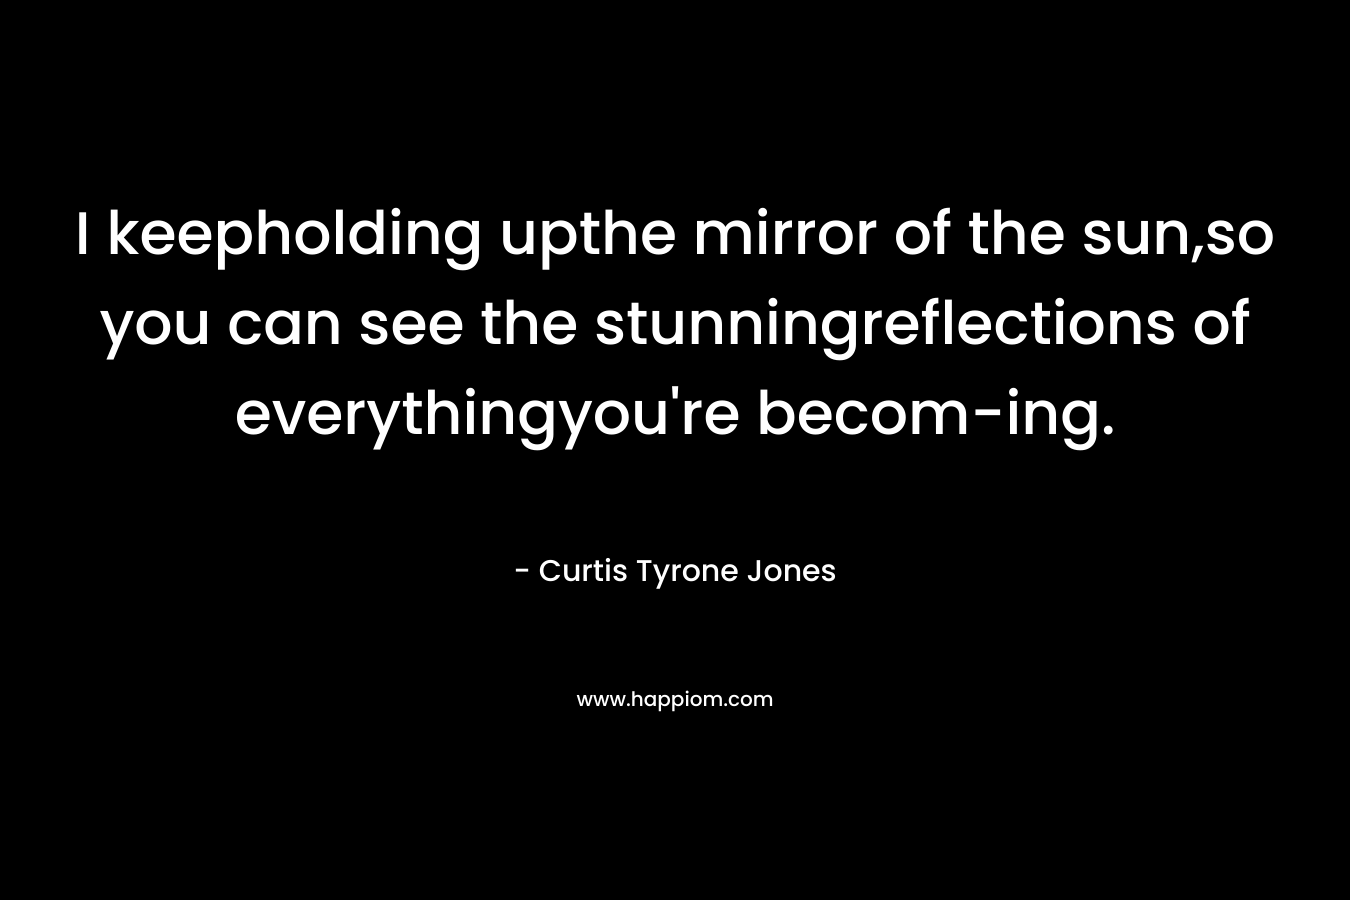 I keepholding upthe mirror of the sun,so you can see the stunningreflections of everythingyou’re becom-ing. – Curtis Tyrone Jones